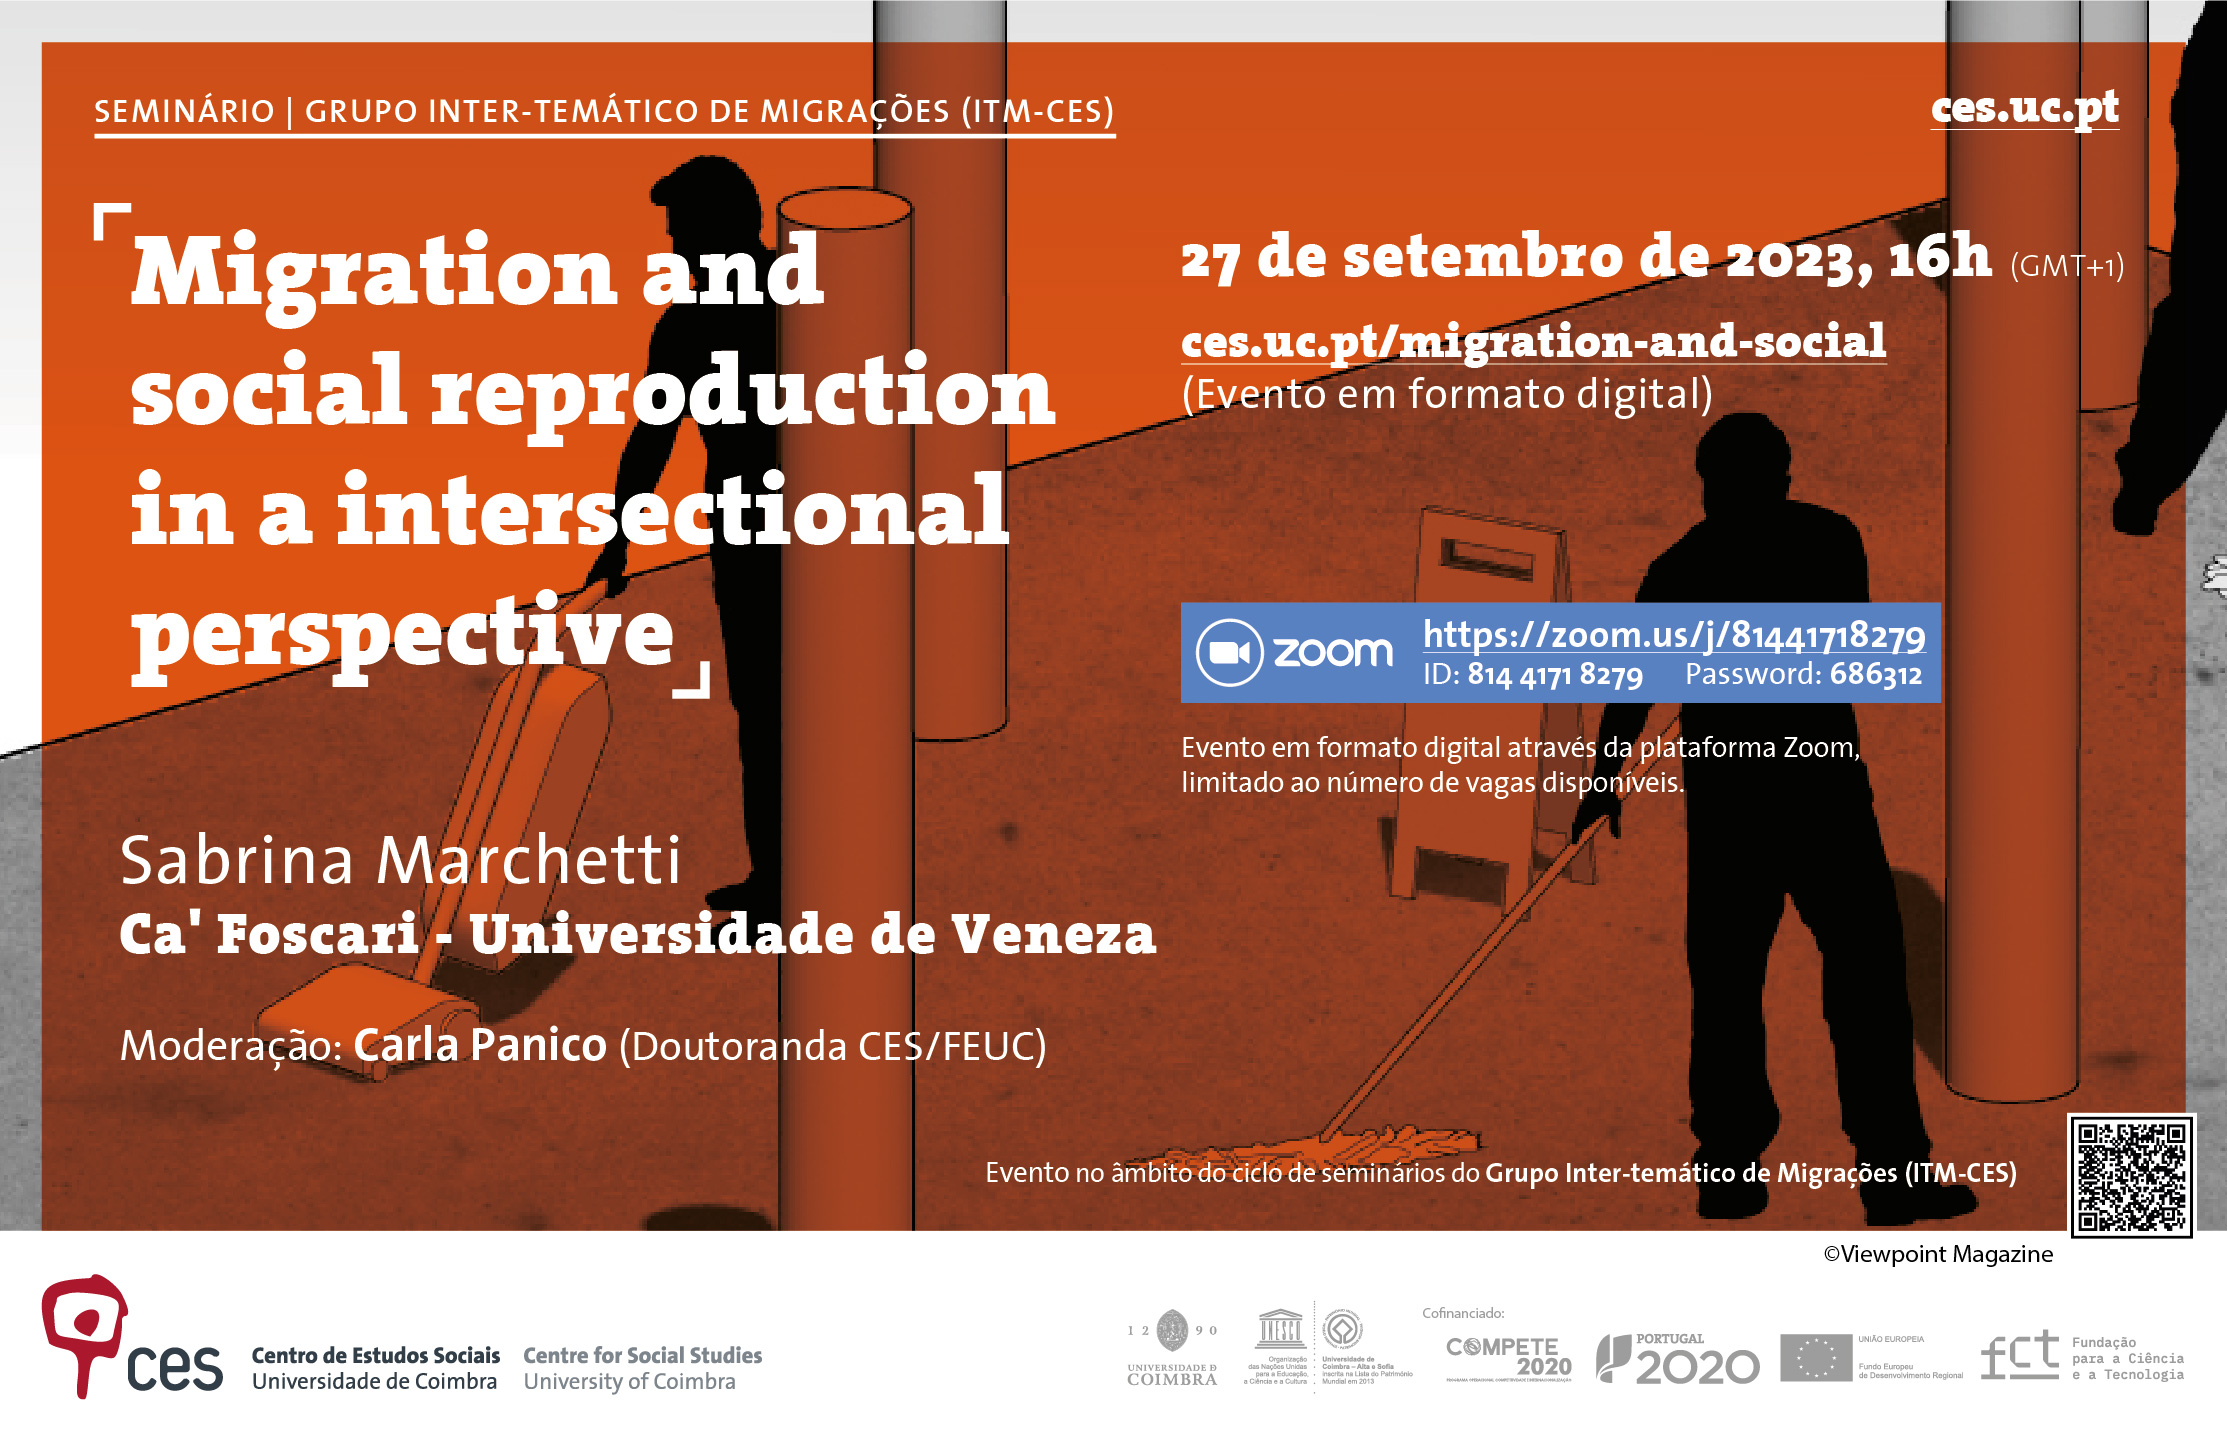 Migration and social reproduction in a intersectional perspective<span id="edit_43830"><script>$(function() { $('#edit_43830').load( "/myces/user/editobj.php?tipo=evento&id=43830" ); });</script></span>